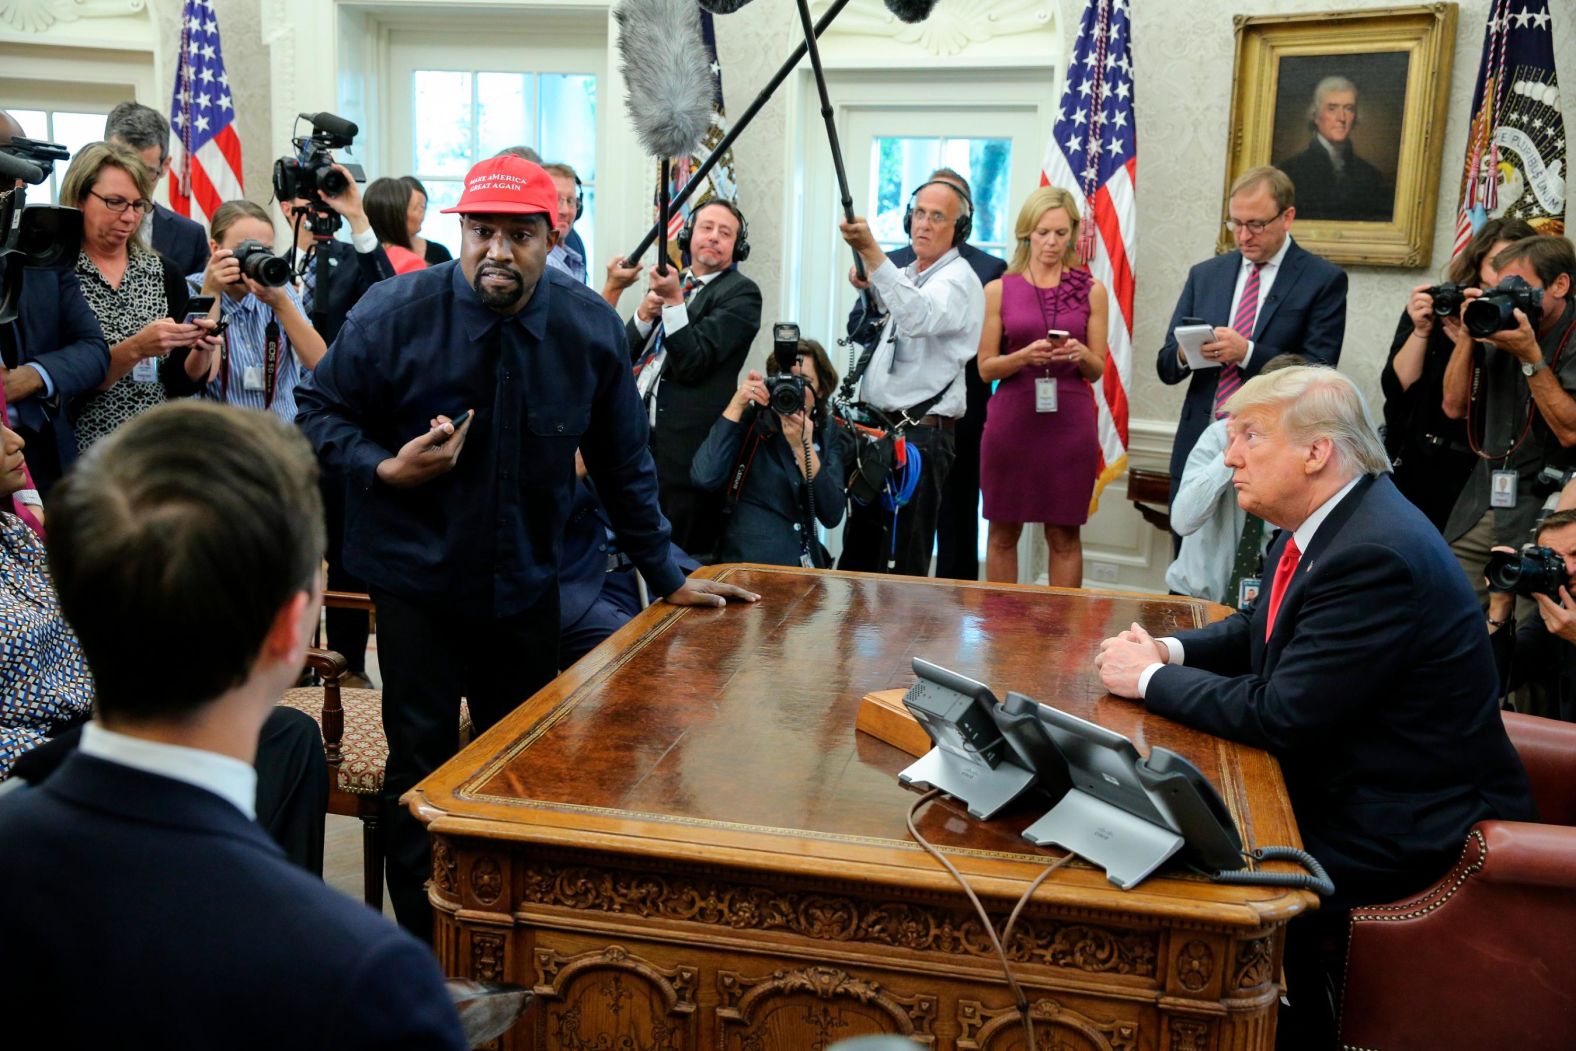 Rapper Kanye West stands up during his Oval Office meeting with Trump in October 2018. West and football legend Jim Brown <a href="index.php?page=&url=https%3A%2F%2Fwww.cnn.com%2F2018%2F10%2F11%2Fpolitics%2Fkanye-west-donald-trump-white-house-chicago%2Findex.html" target="_blank">had been invited for a working lunch</a> to discuss topics such as urban revitalization, workforce training programs and how best to address crime in Chicago. 